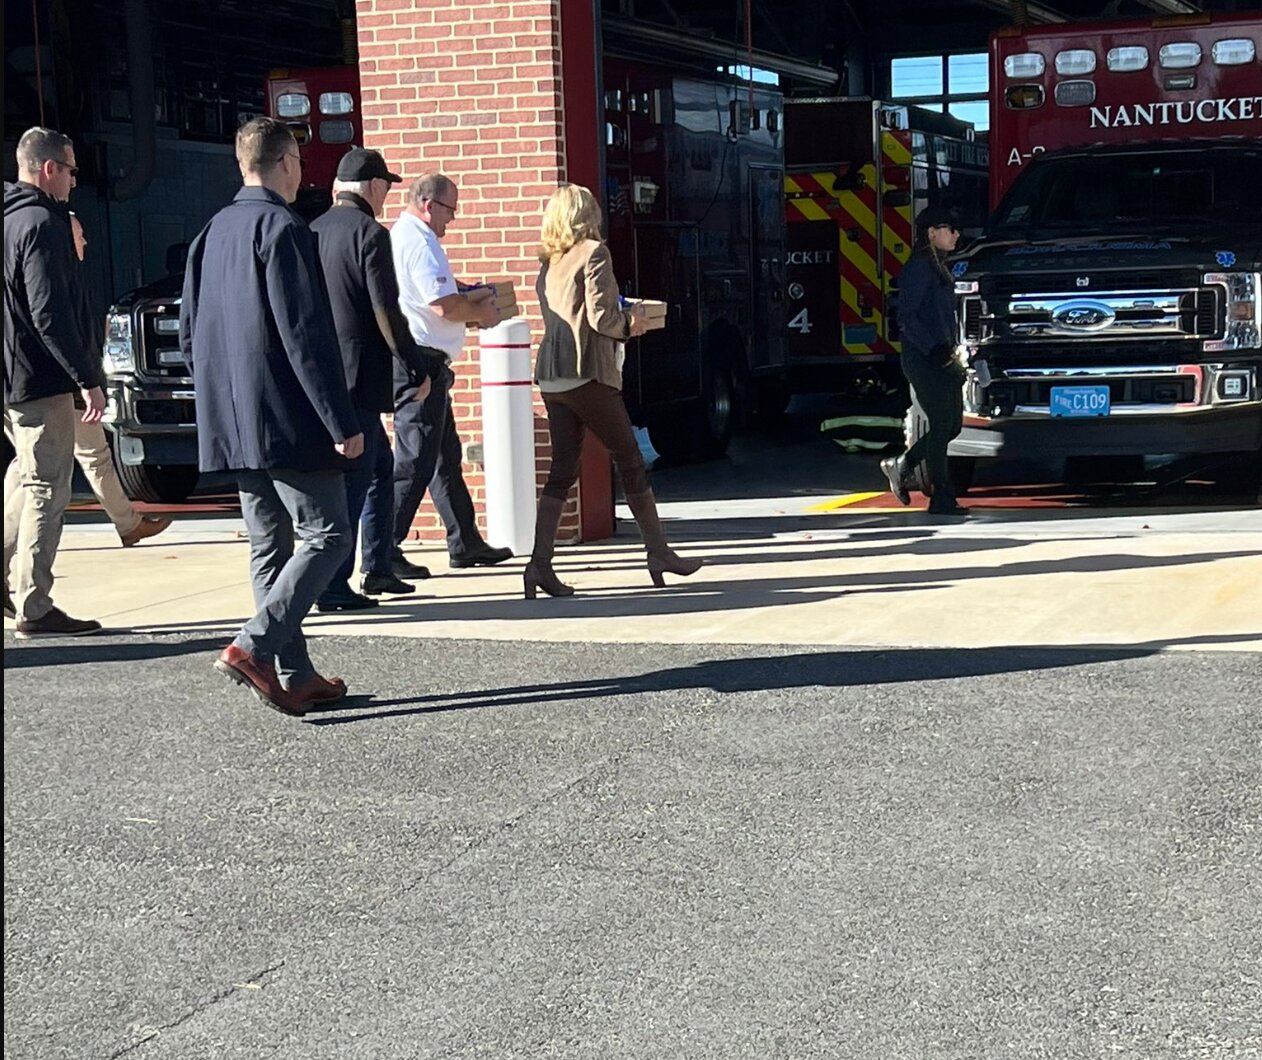 President Joe Biden and first lady Jill Biden made a quick trip to the Nantucket Fire Department Thanksgiving to deliver holiday pies to the firefighters.